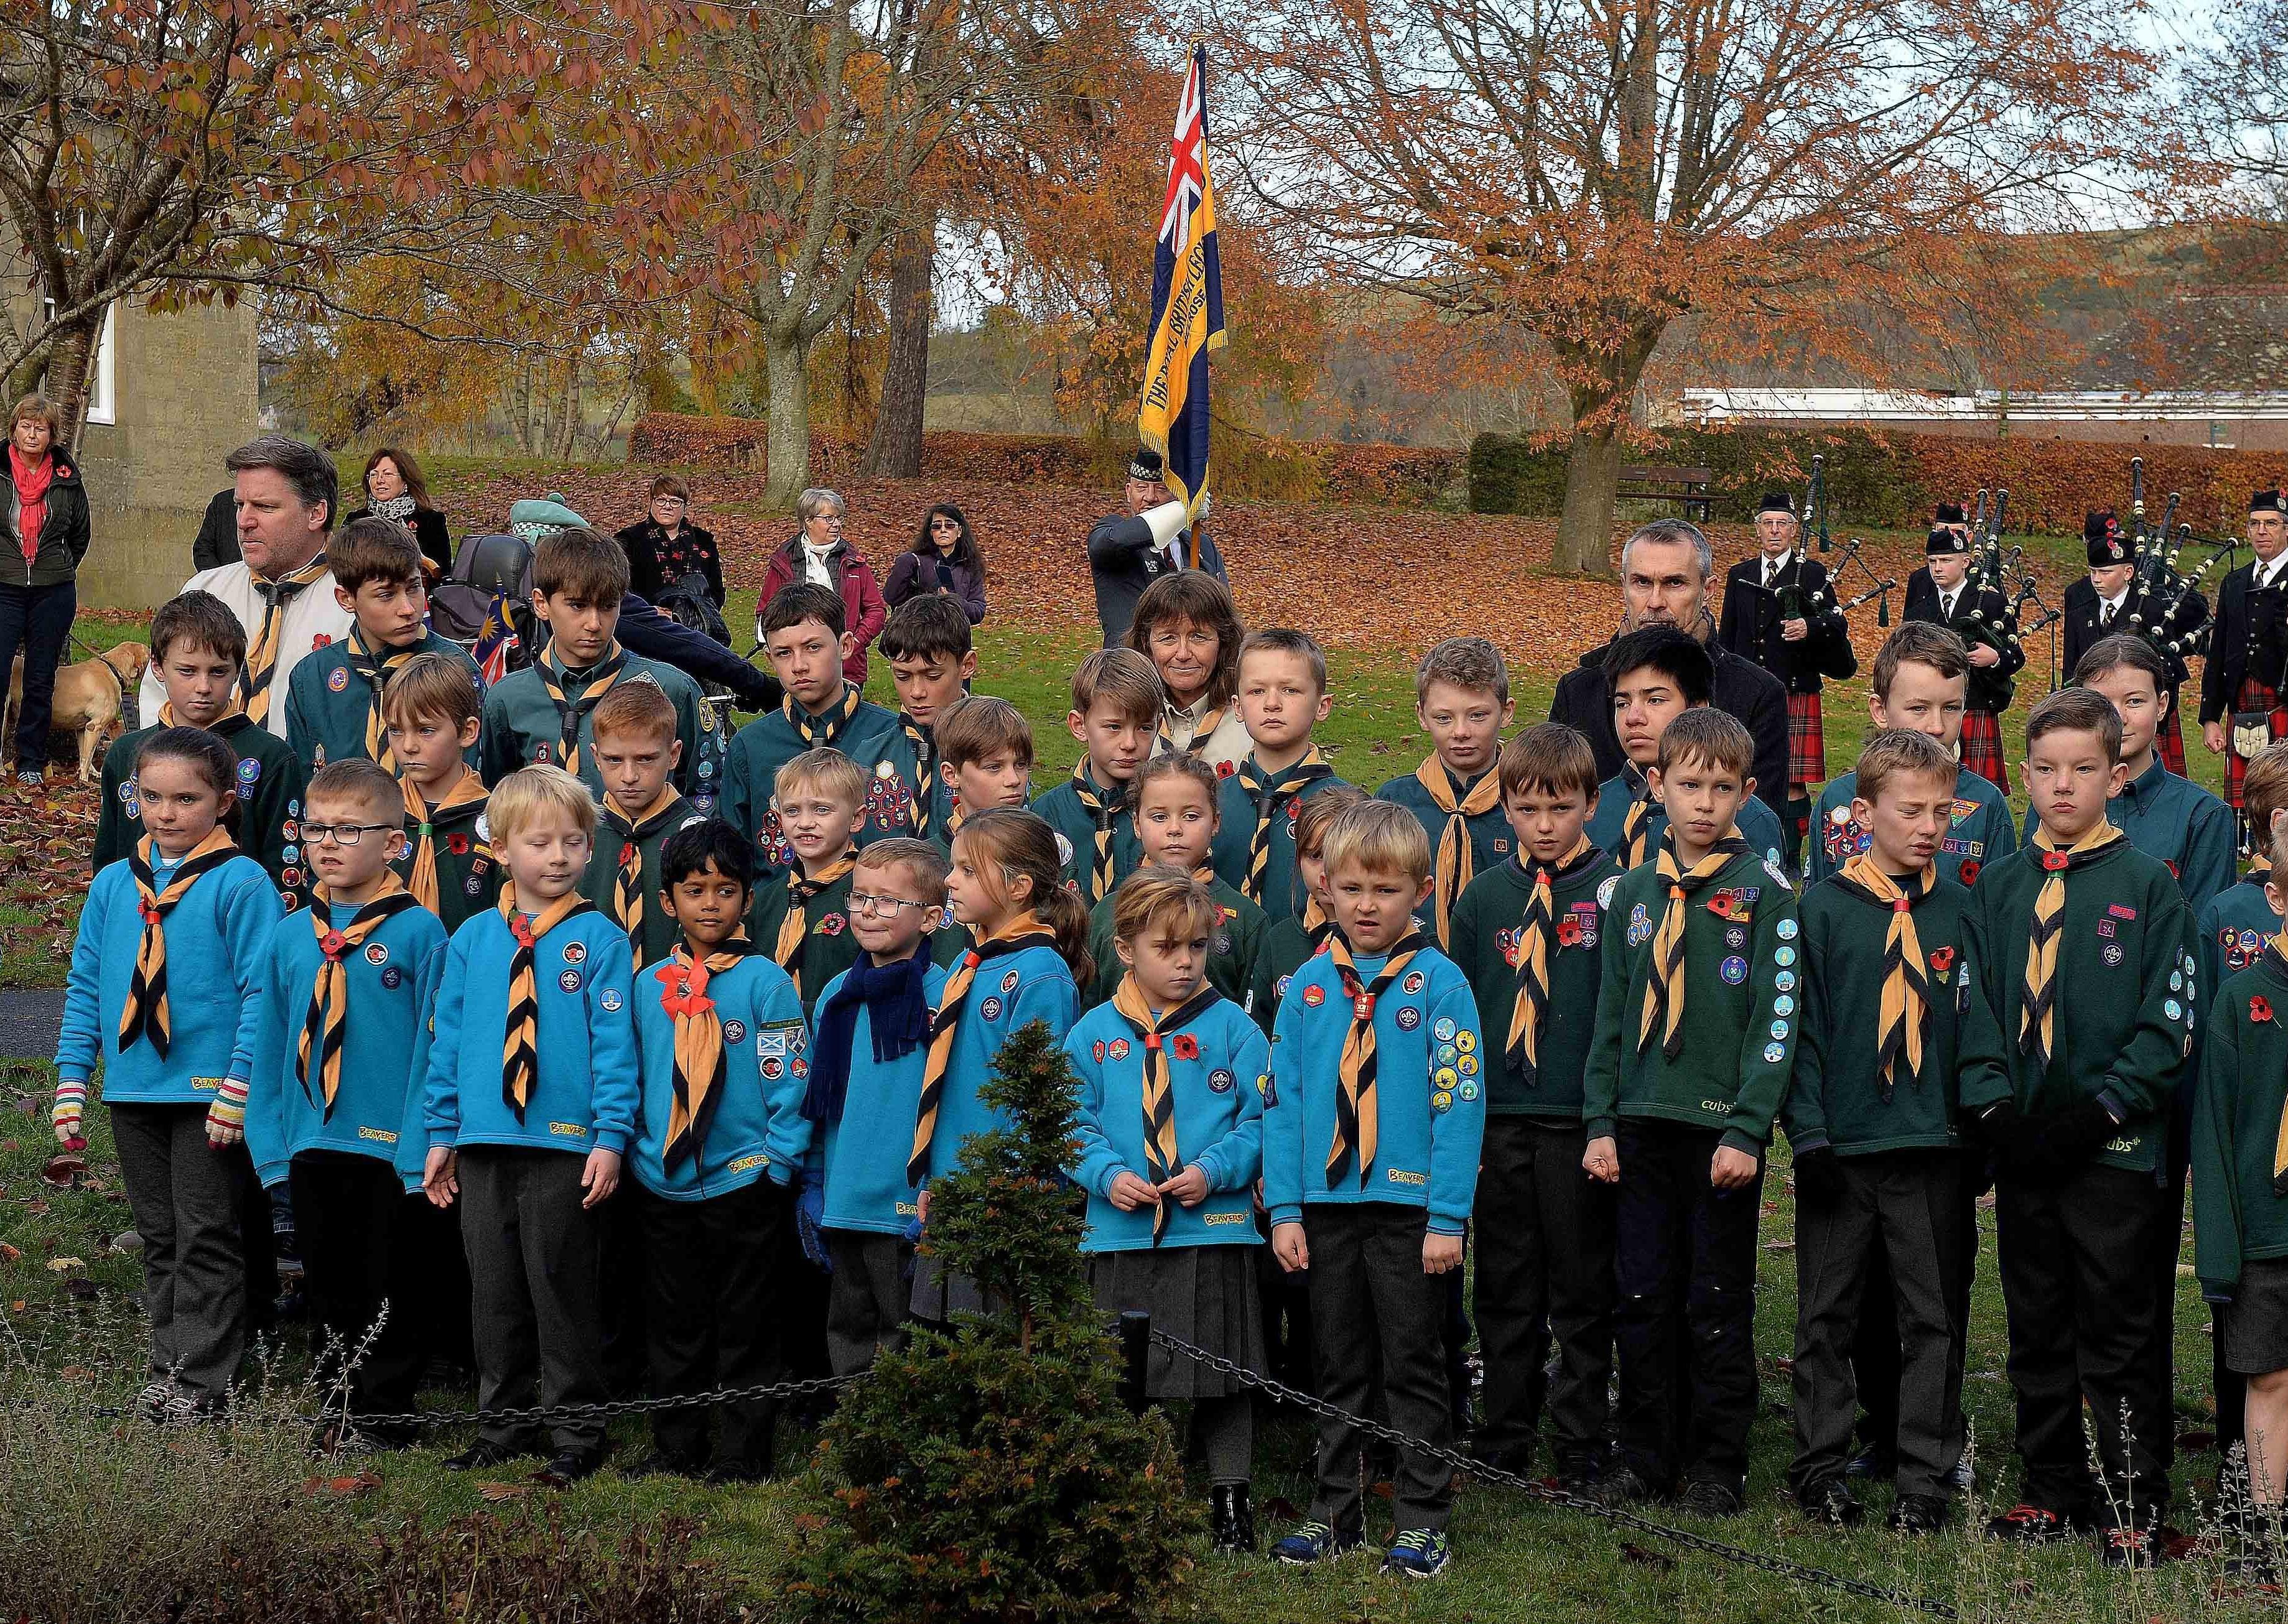 The town's Beavers and Cubs pay their respects.